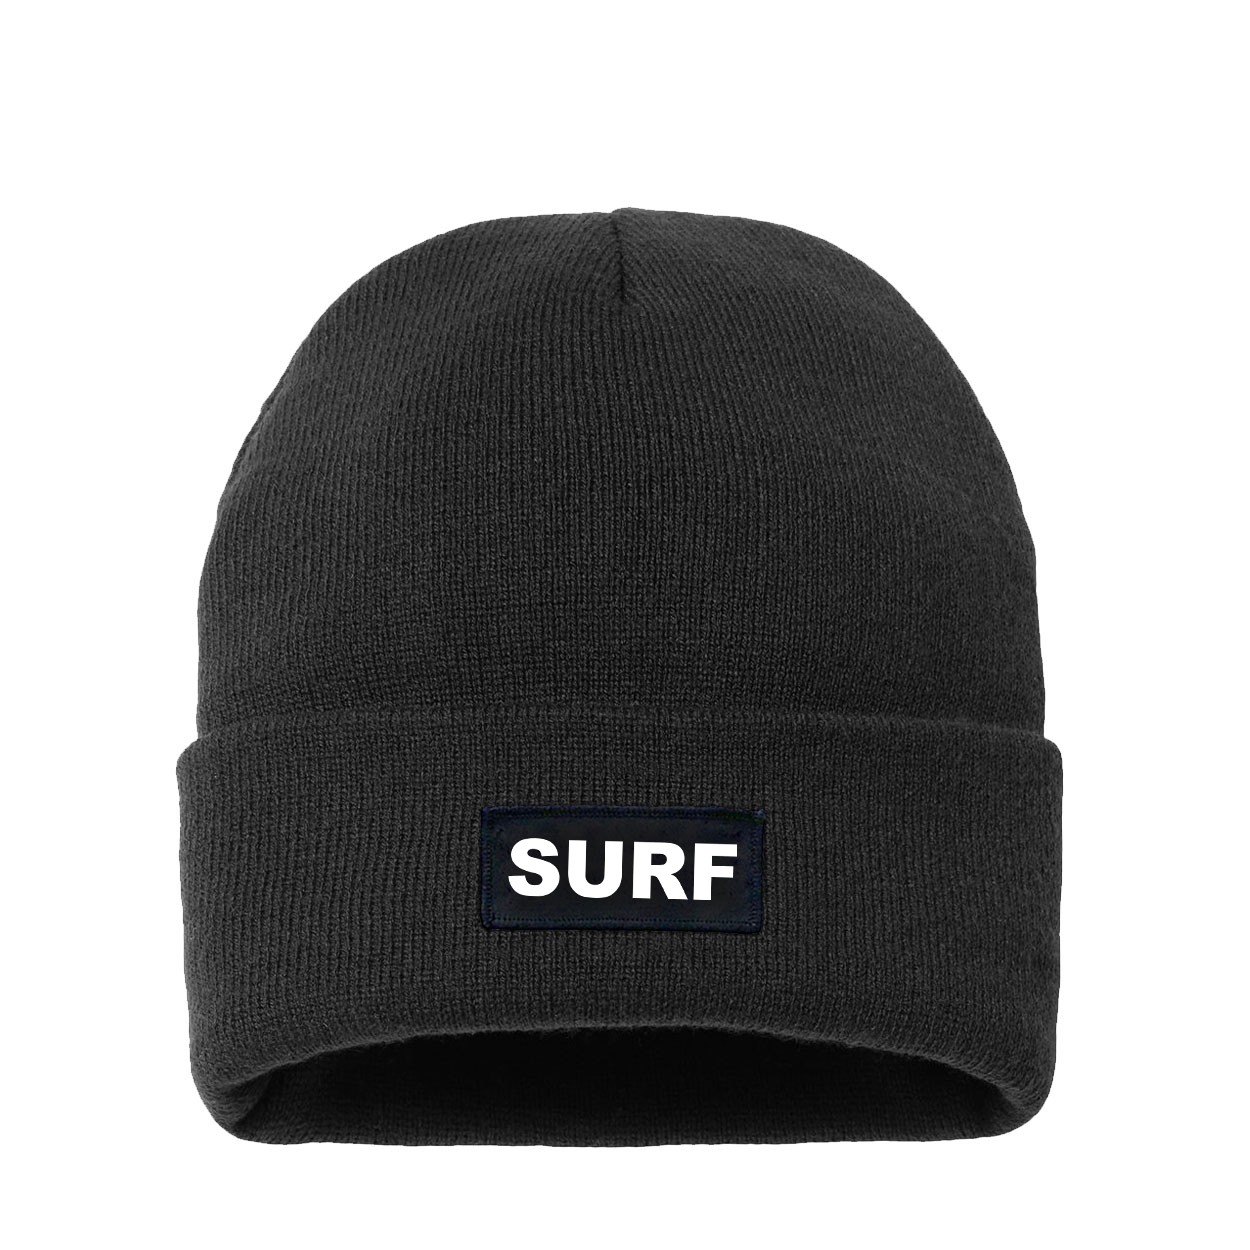 Surf Brand Logo Night Out Woven Patch Night Out Sherpa Lined Cuffed Beanie Black